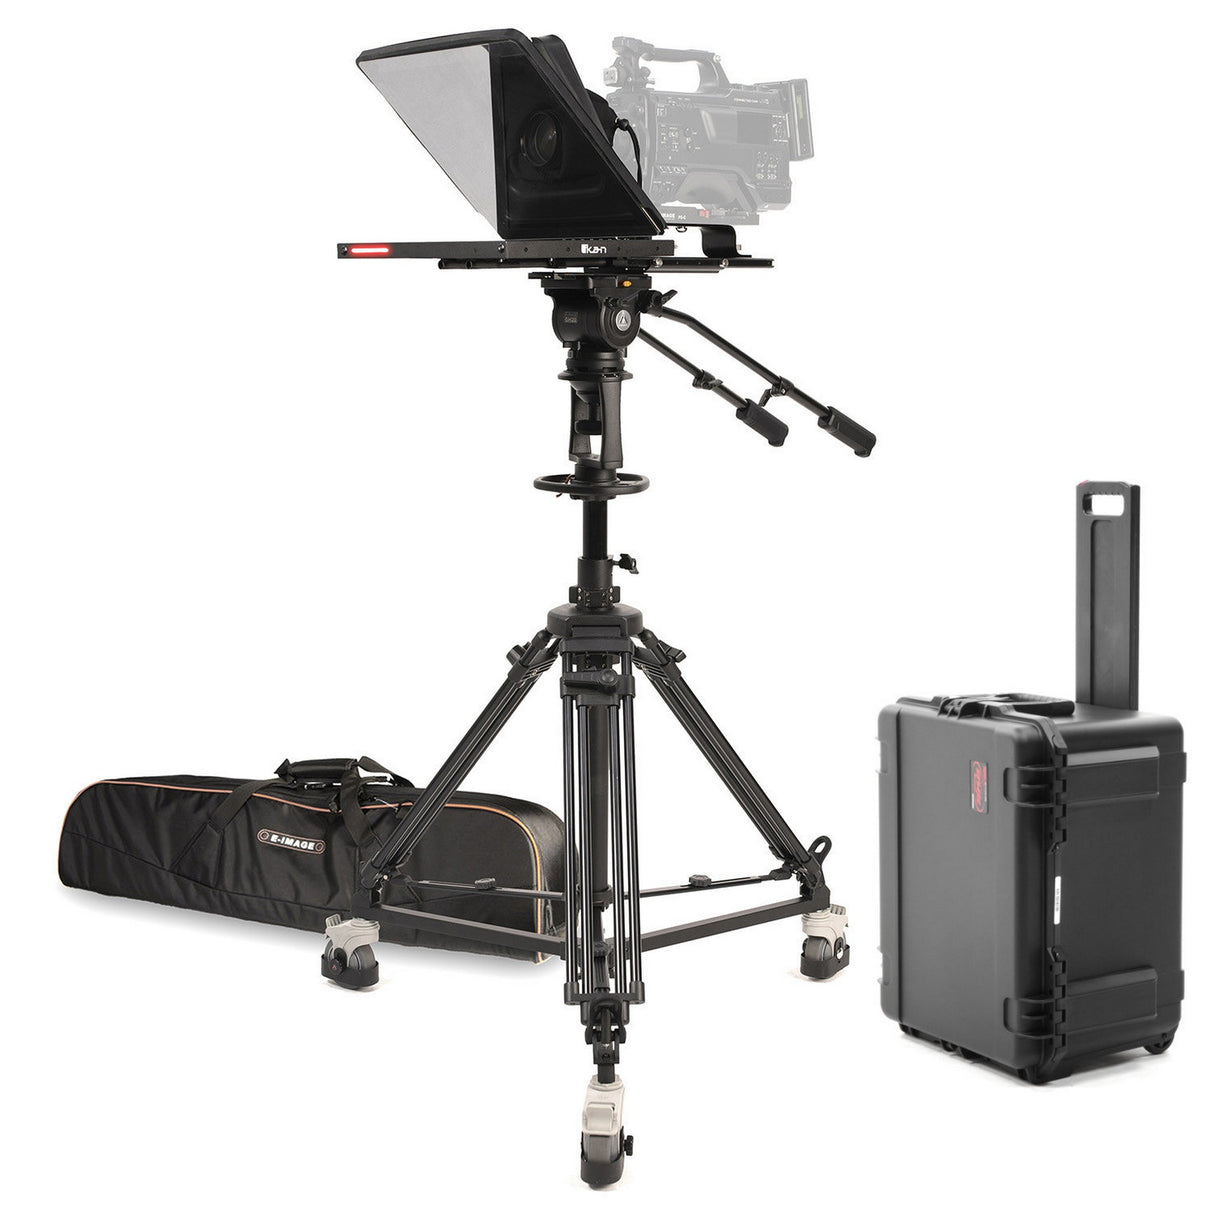 Ikan PT4500W-PEDESTAL-TK 15-Inch Widescreen Teleprompter with Pedestal and Travel Case